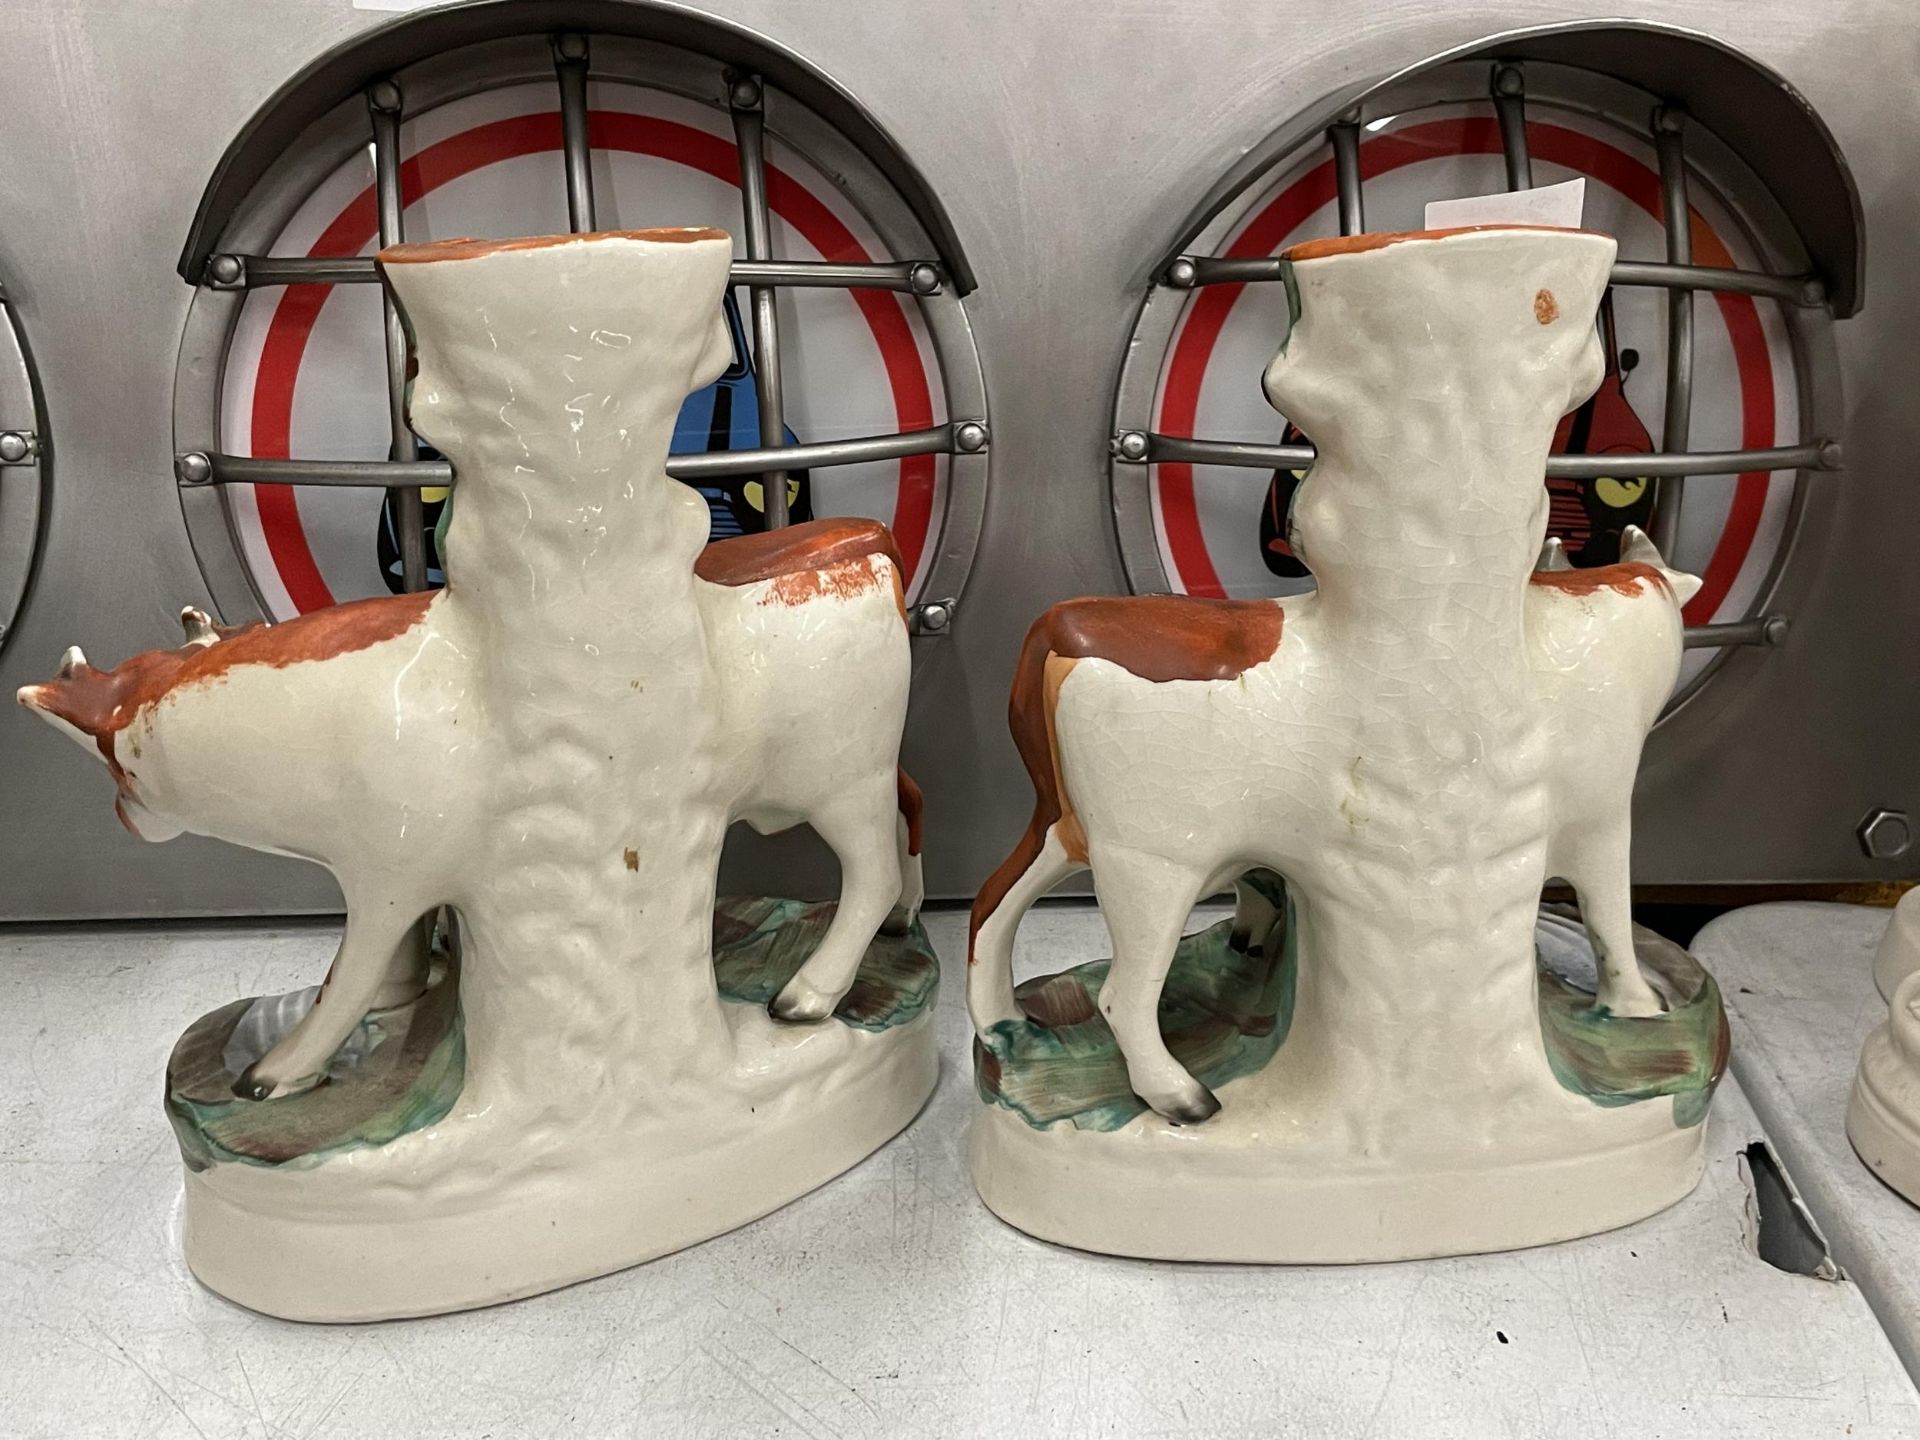 A PAIR OF 19TH CENTURY STAFFORDSHIRE POTTERY COW SPILL VASES - Image 2 of 3